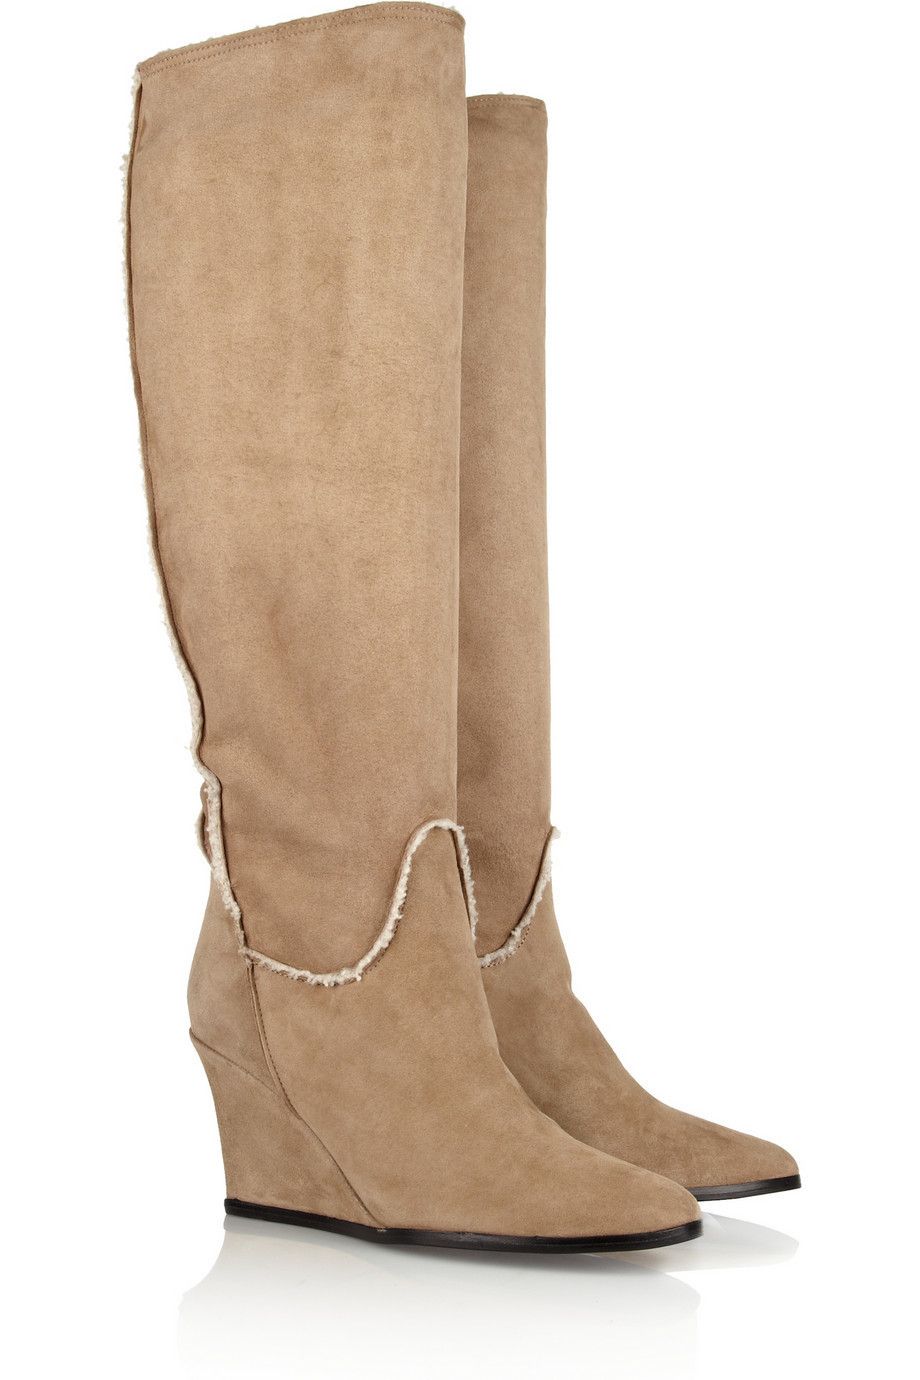 Brown, Boot, Riding boot, Khaki, Tan, Leather, Beige, Costume accessory, Liver, Knee-high boot, 